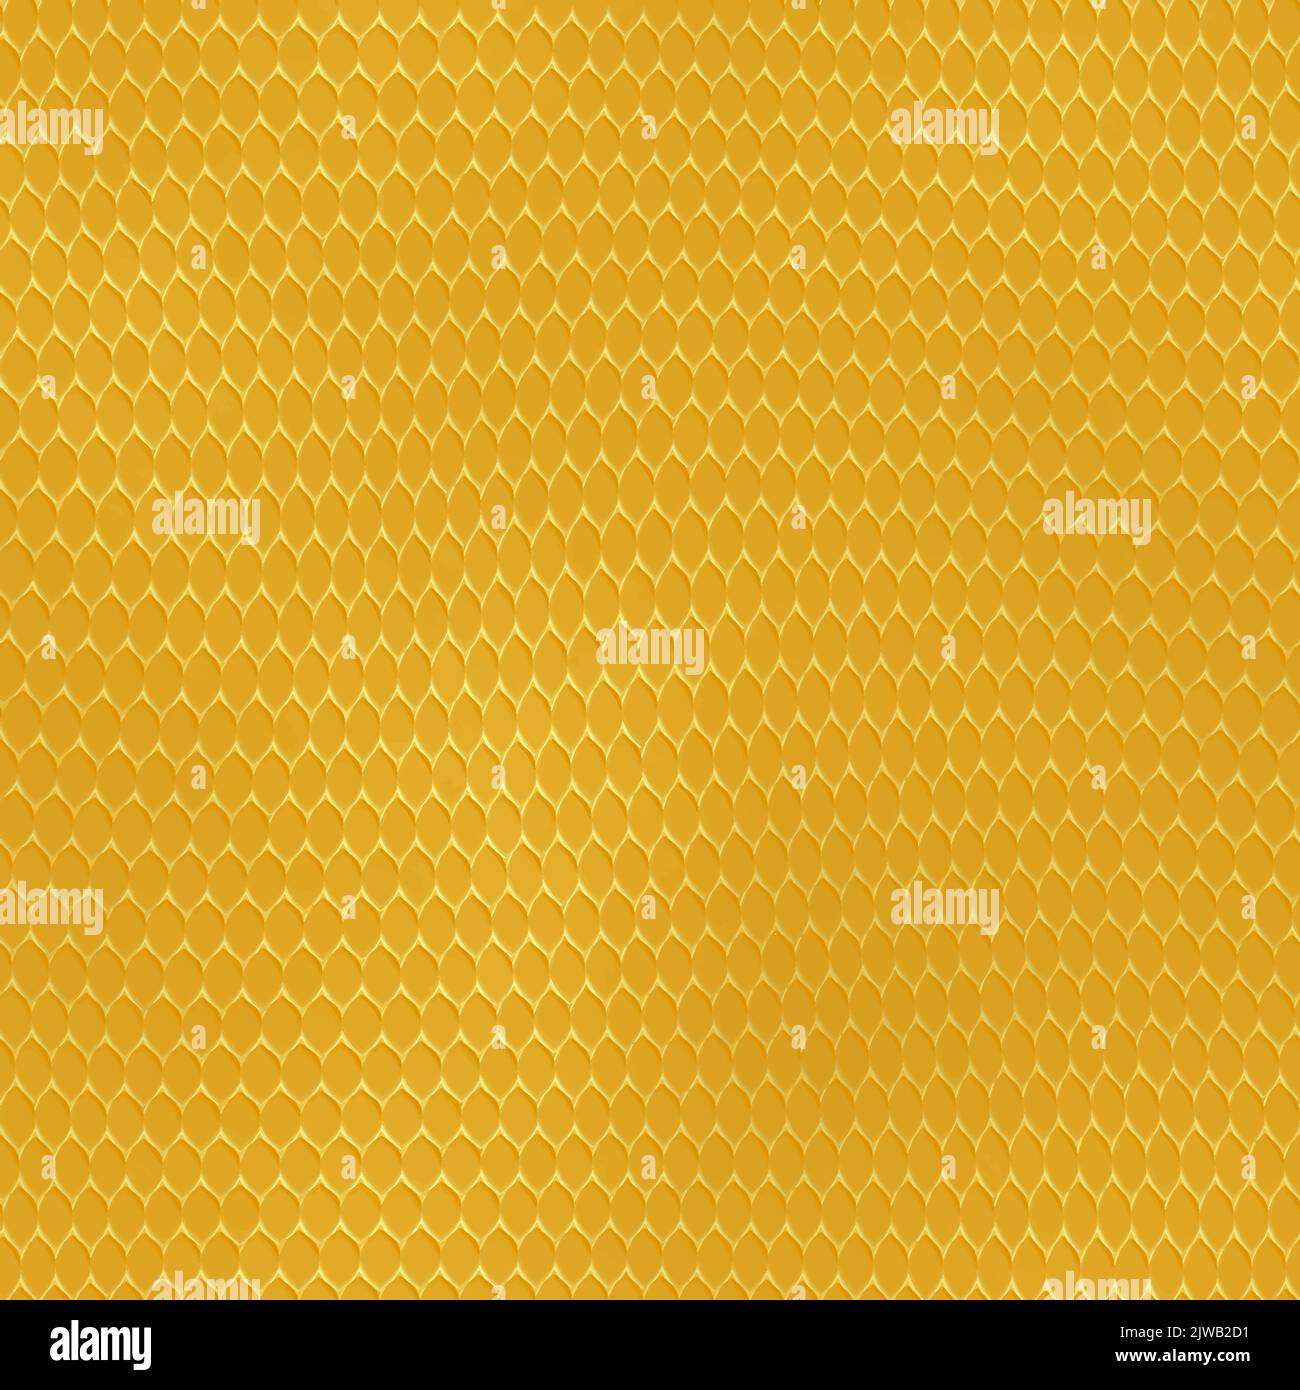 Alligator skin texture. Seamless crocodile pattern, reptile scales light yellow lether wild tropical animal. Crocodile pattern skin illustration, text Stock Vector